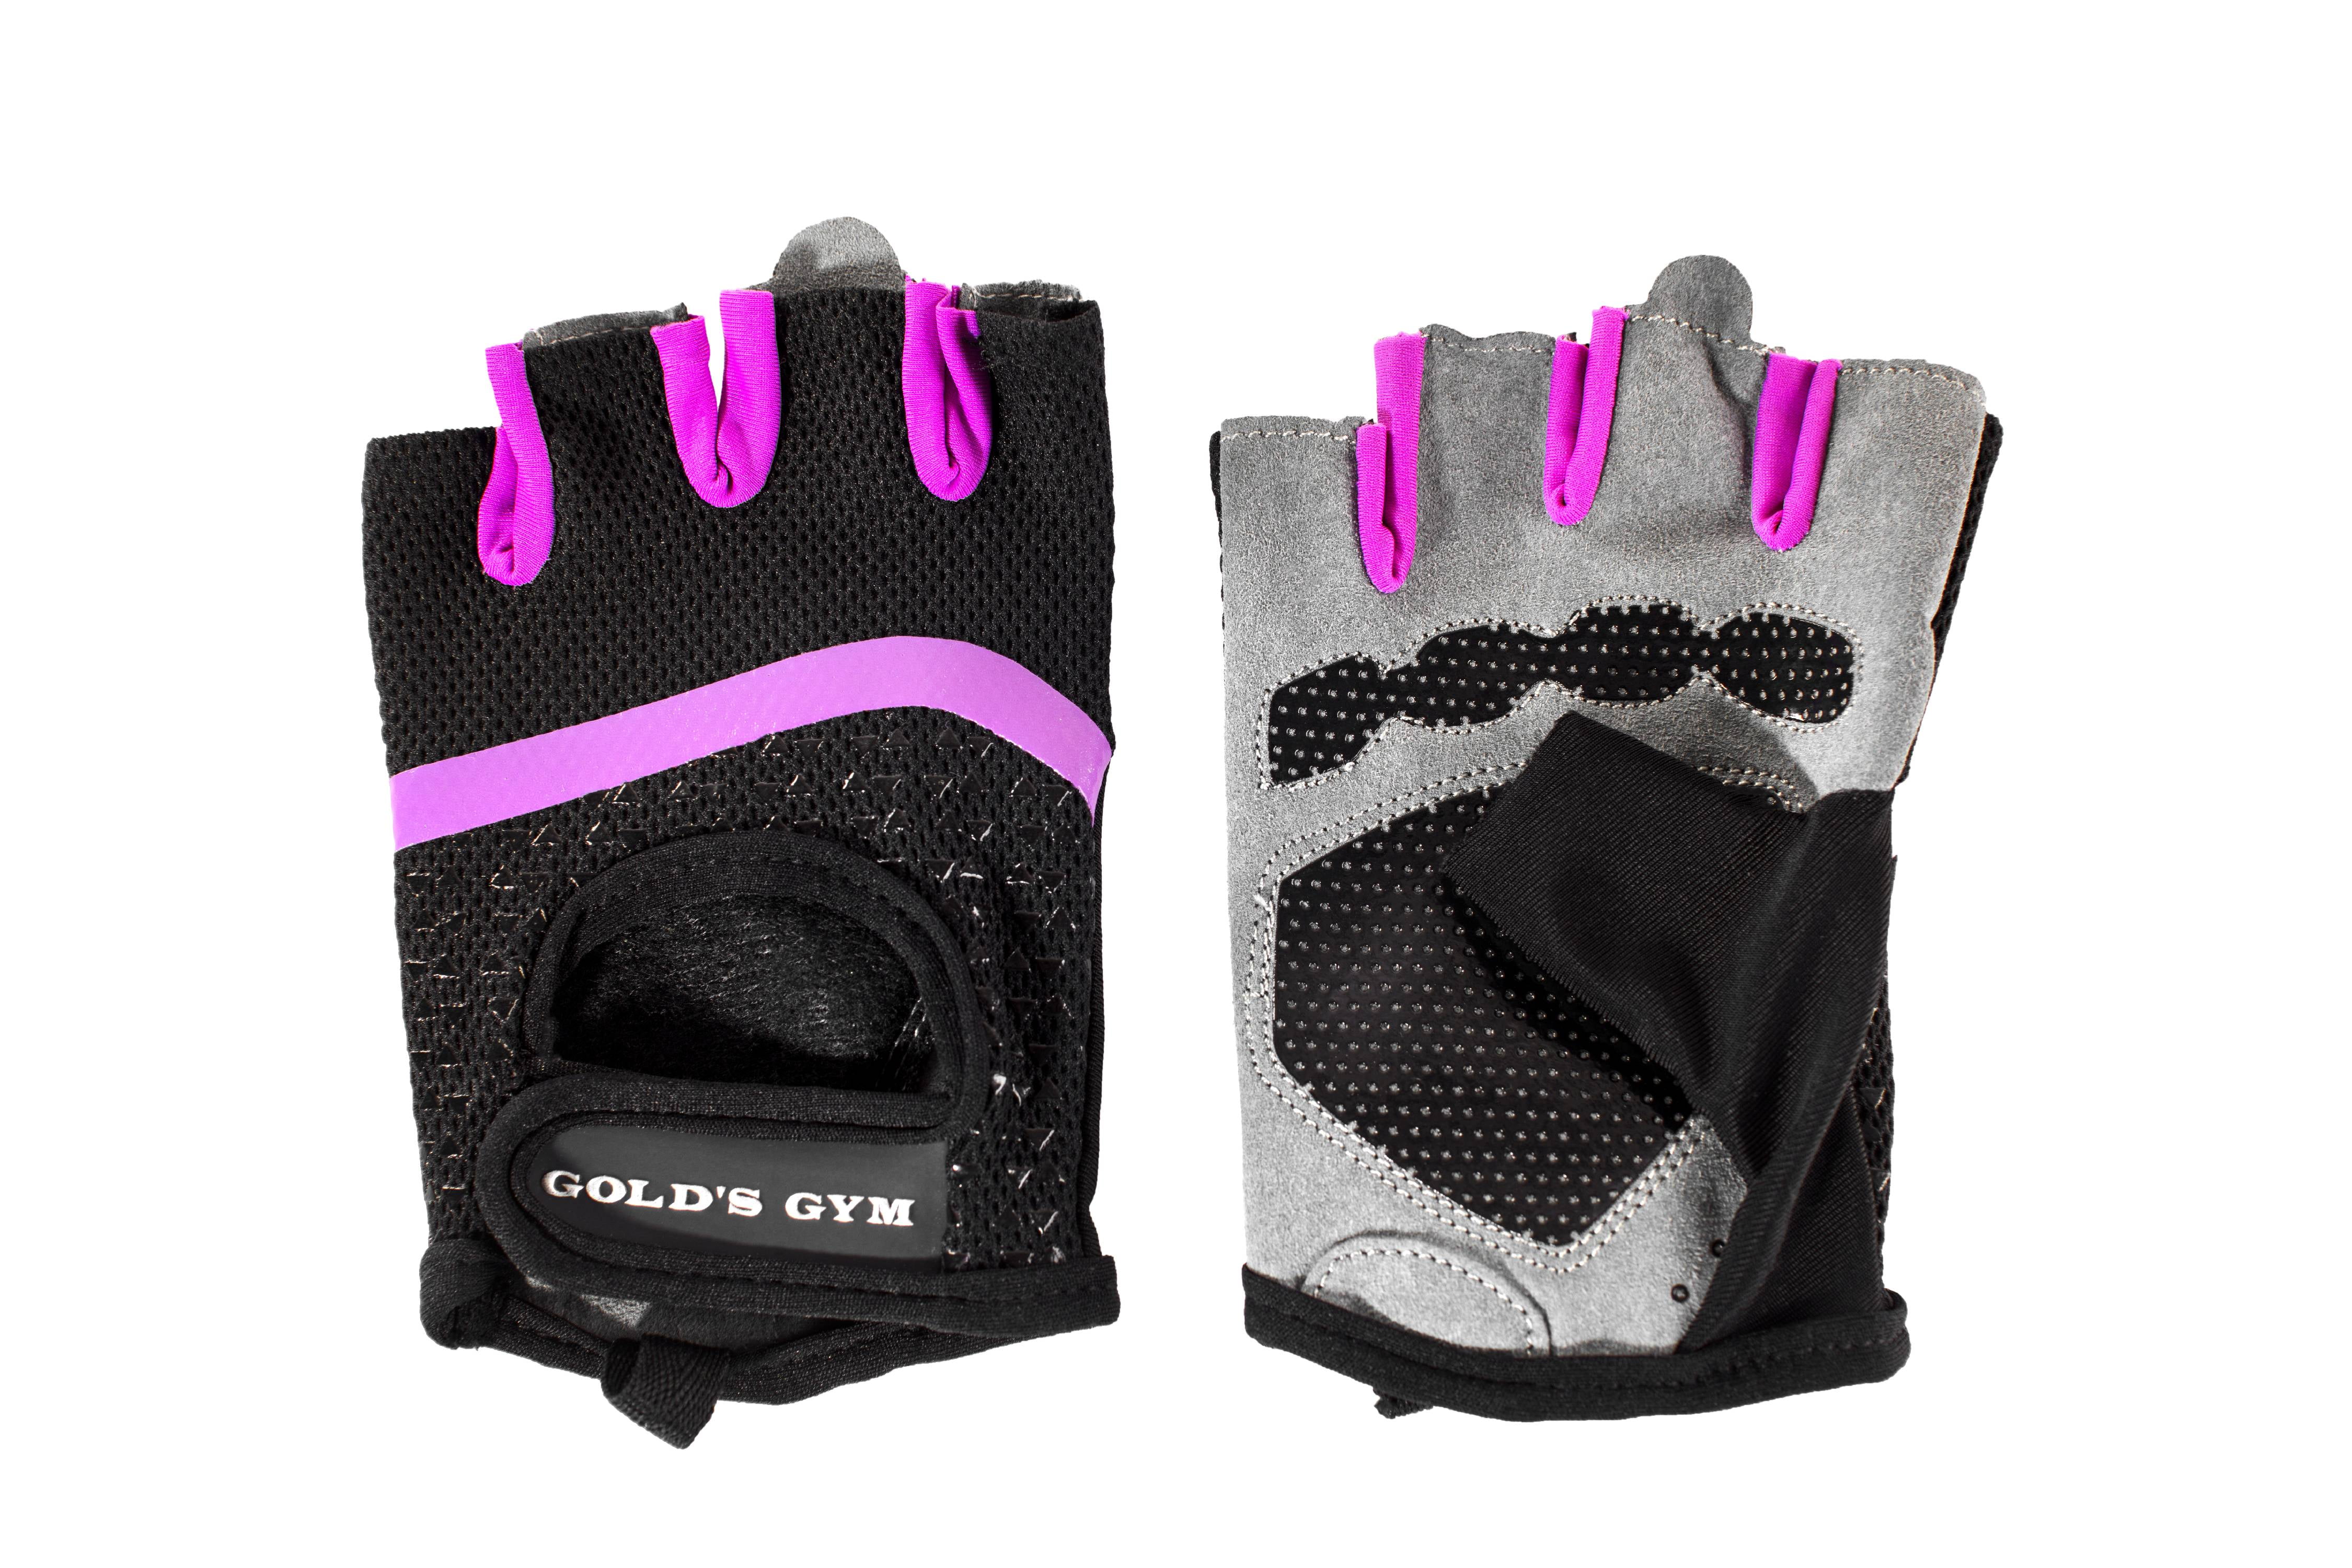 Gold's Gym Women's Tacky Half-finger Weight Lifting Gloves M/L 